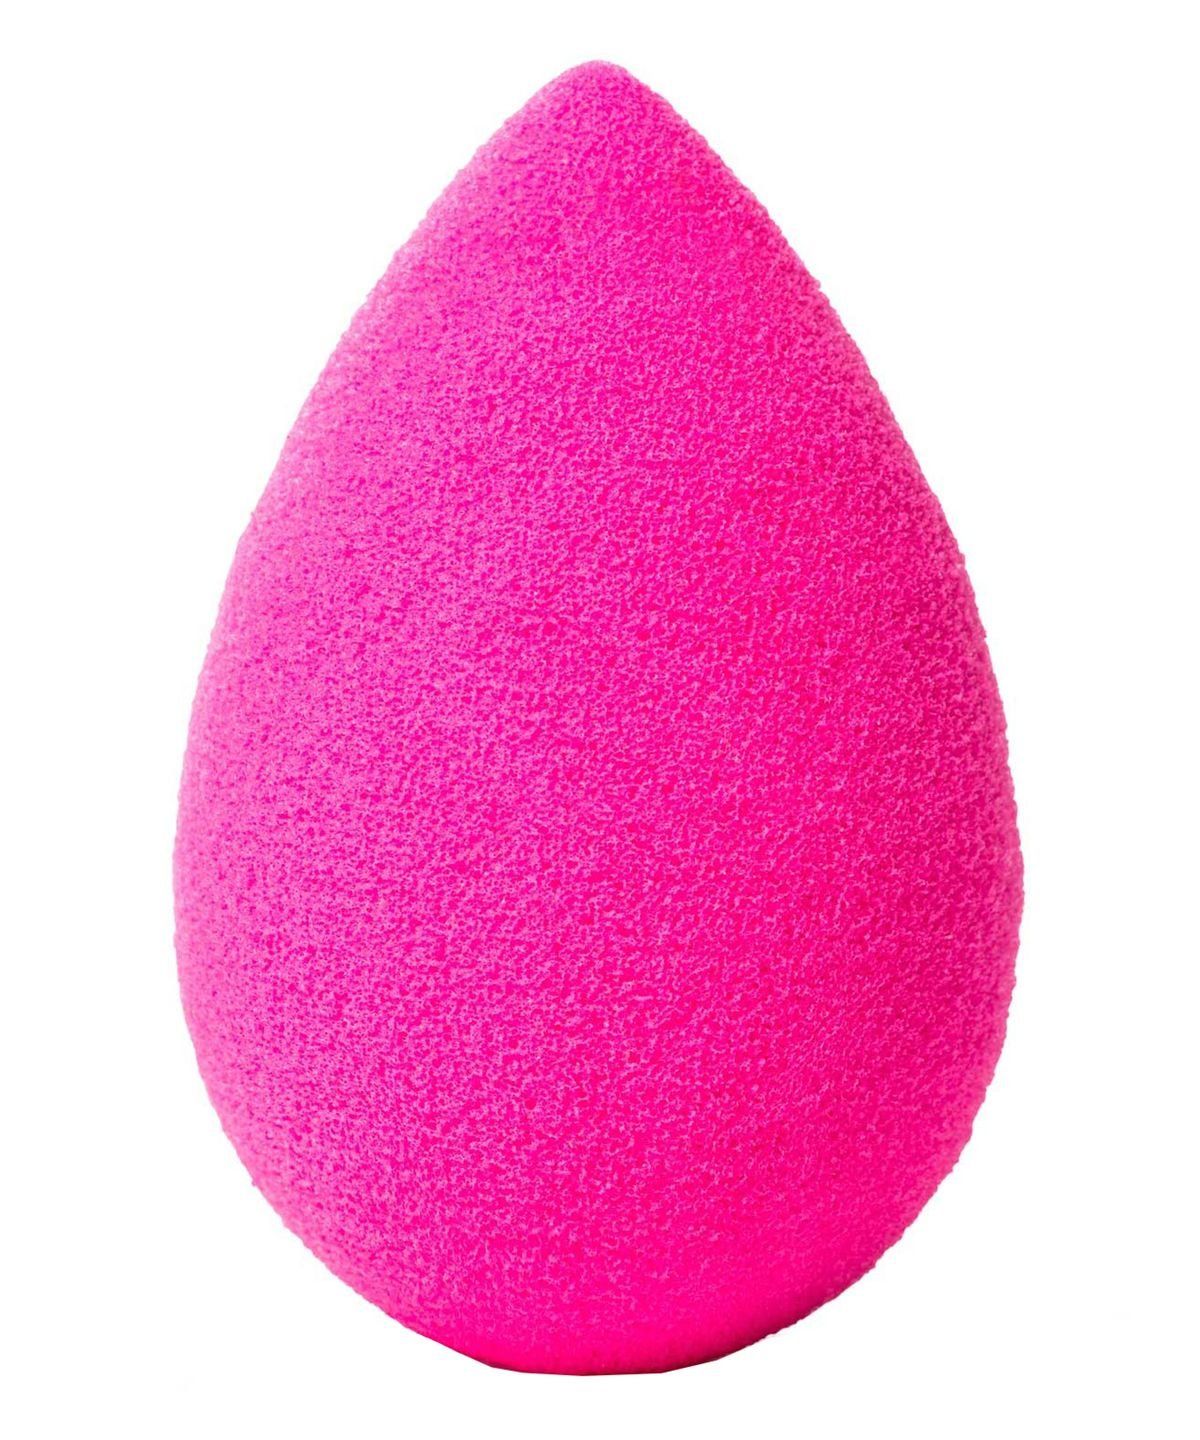 Imported Beauty Blender Powder Puff (5 Shapes) (Tear)